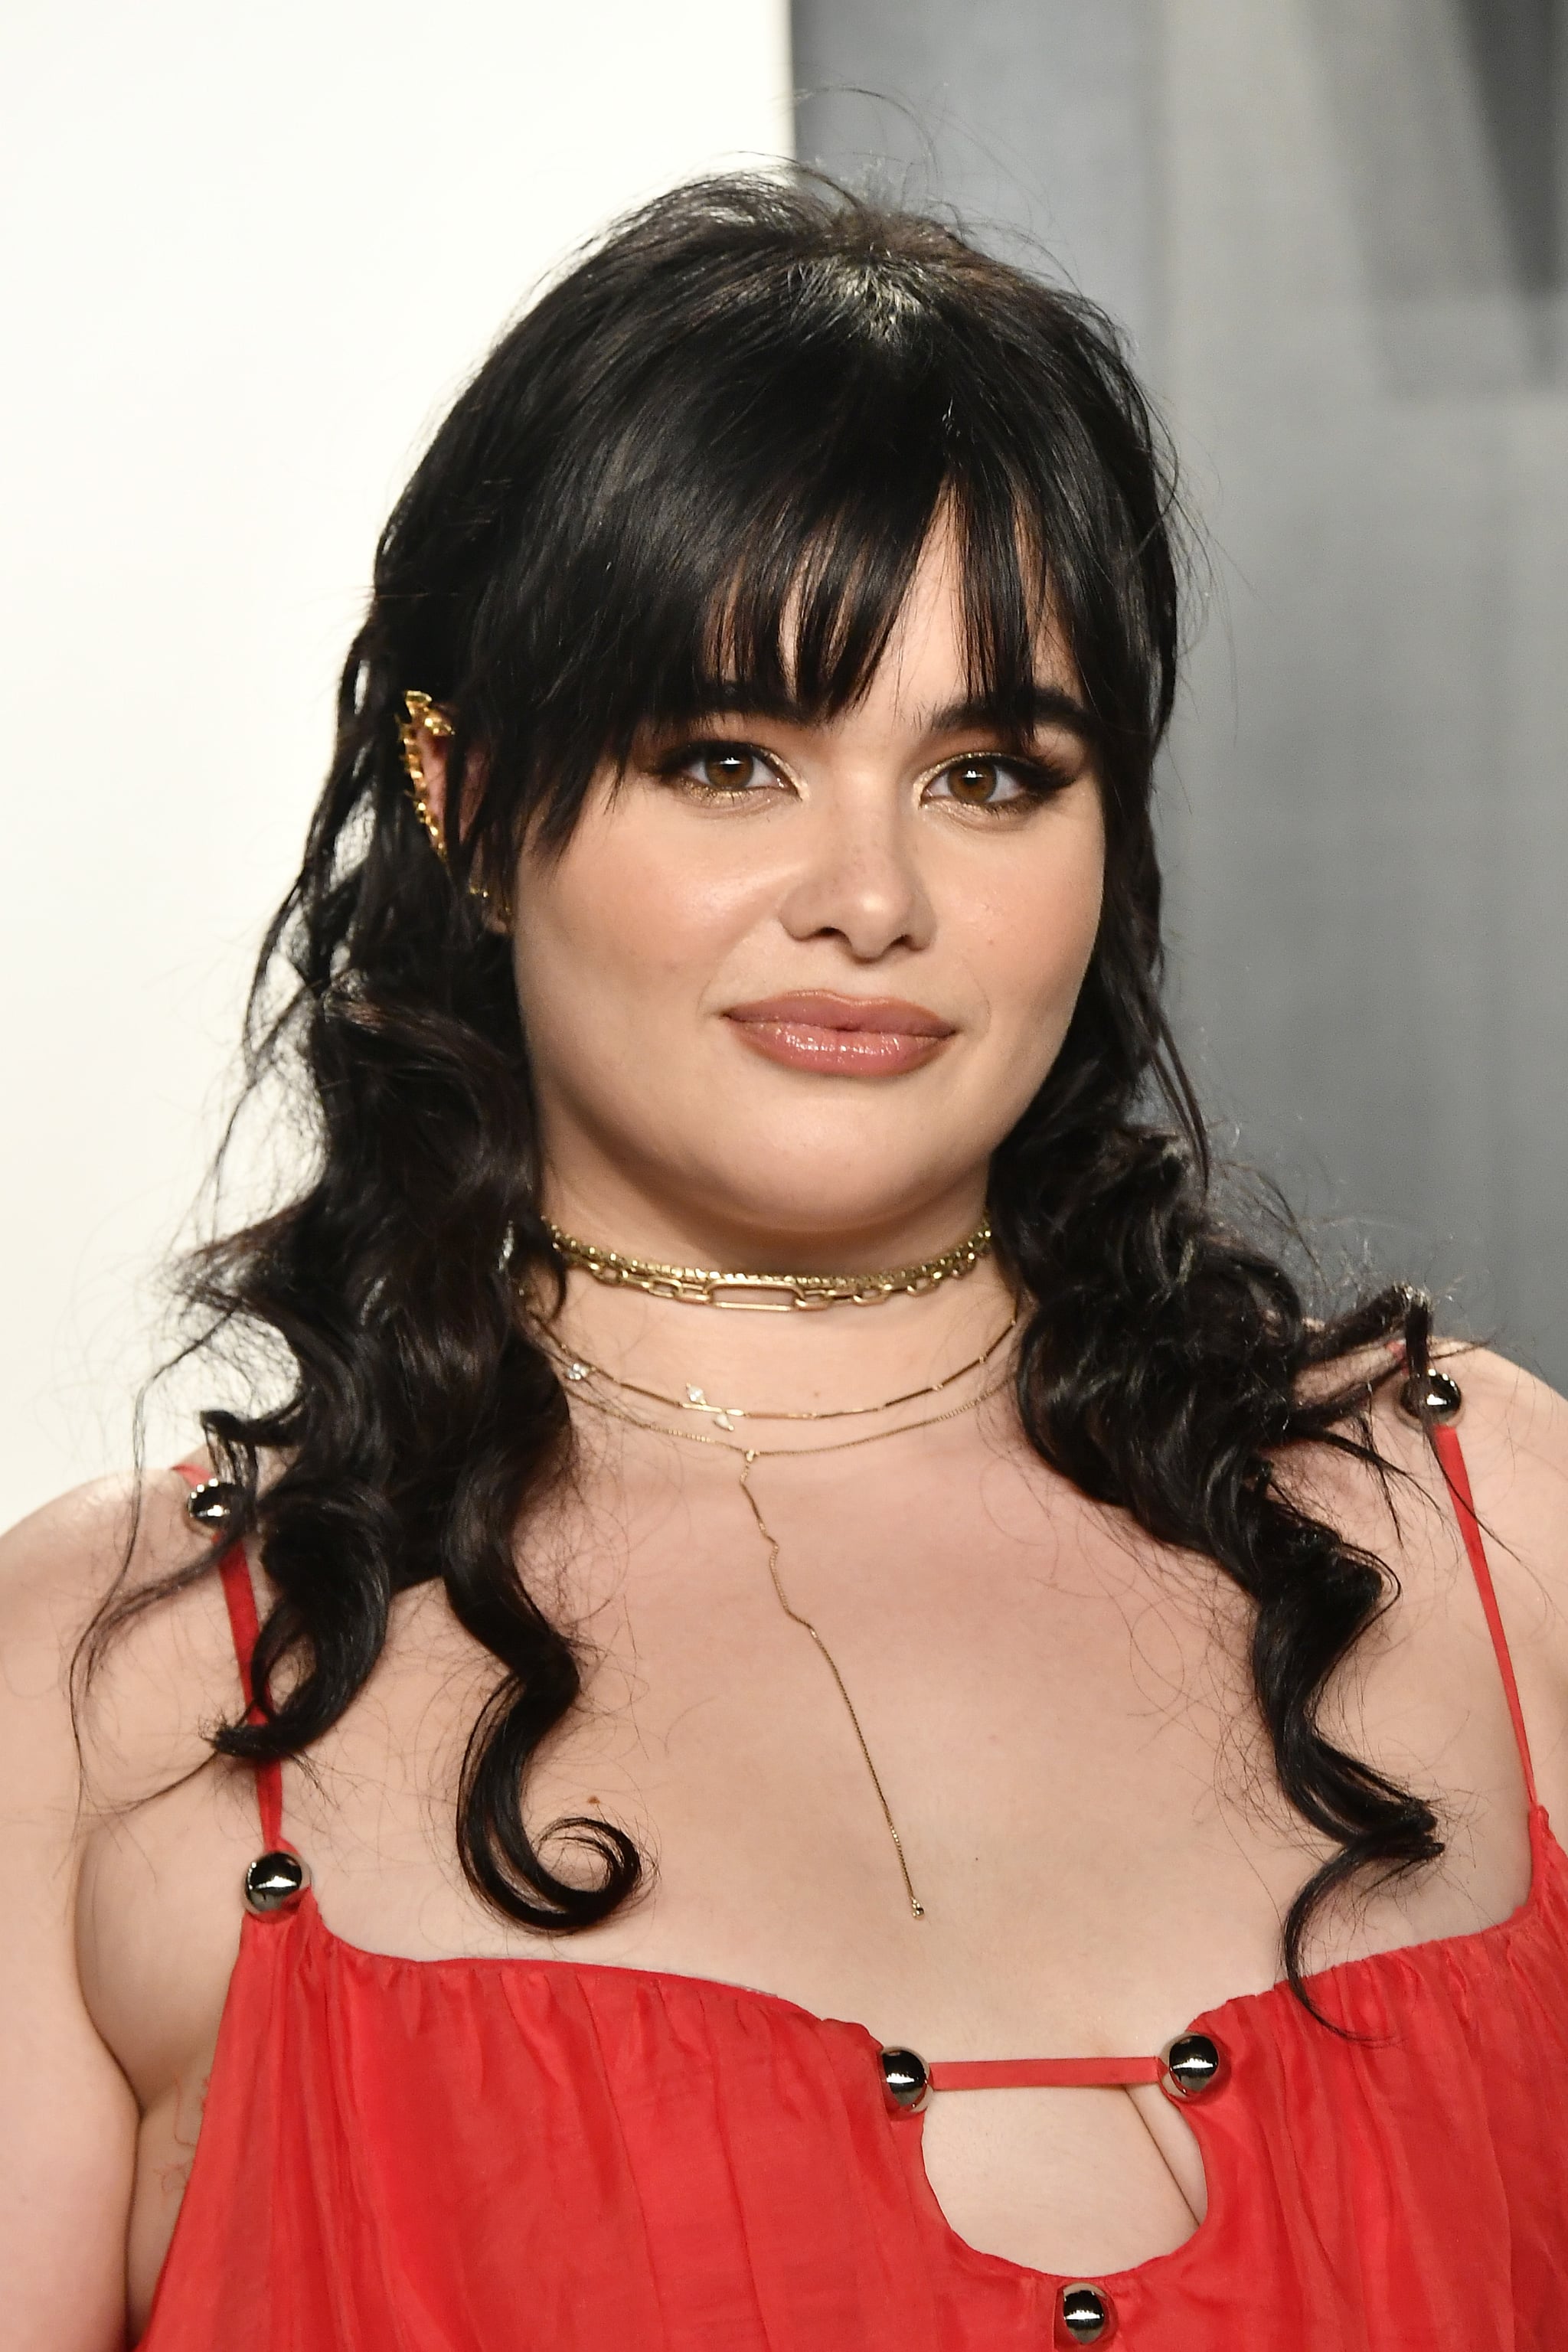 BEVERLY HILLS, CALIFORNIA - FEBRUARY 09: Barbie Ferreira attends the 2020 Vanity Fair Oscar Party hosted by Radhika Jones at Wallis Annenberg Centre for the Performing Arts on February 09, 2020 in Beverly Hills, California. (Photo by Frazer Harrison/Getty Images)